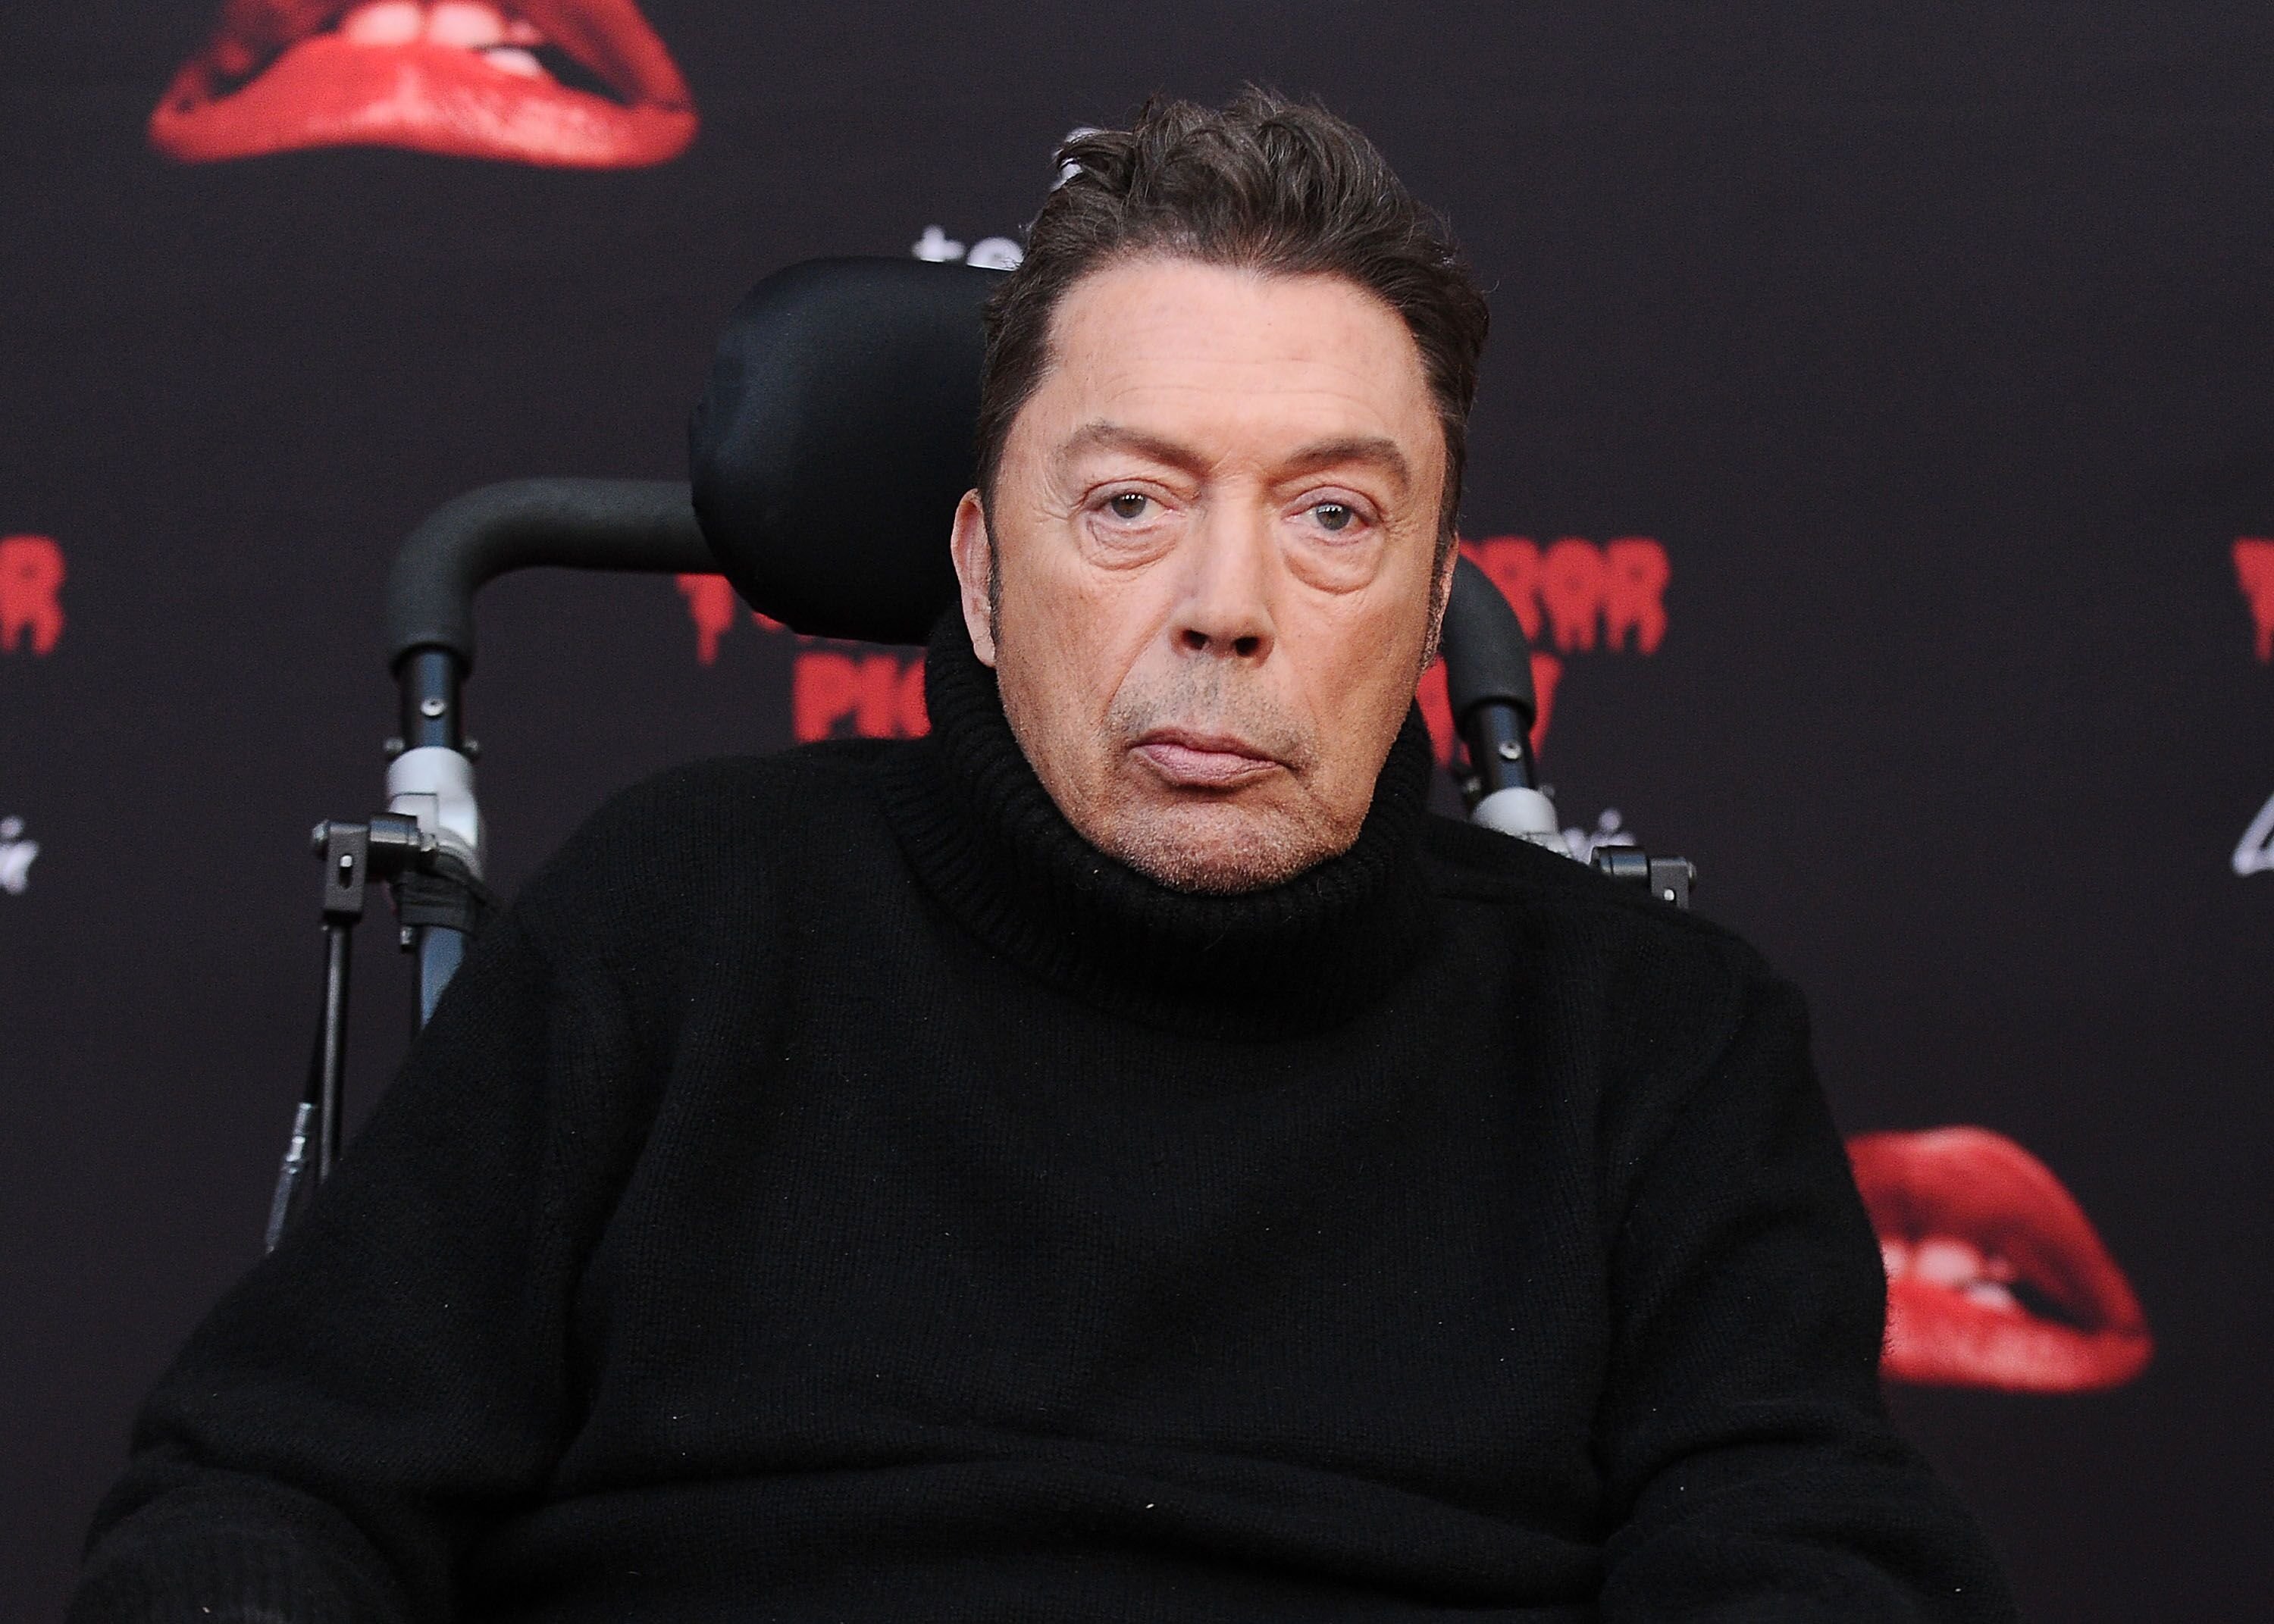 Tim Curry besucht die Premiere von "The Rocky Horror Picture Show: Let's Do The Time Warp Again". | Quelle: Getty Images